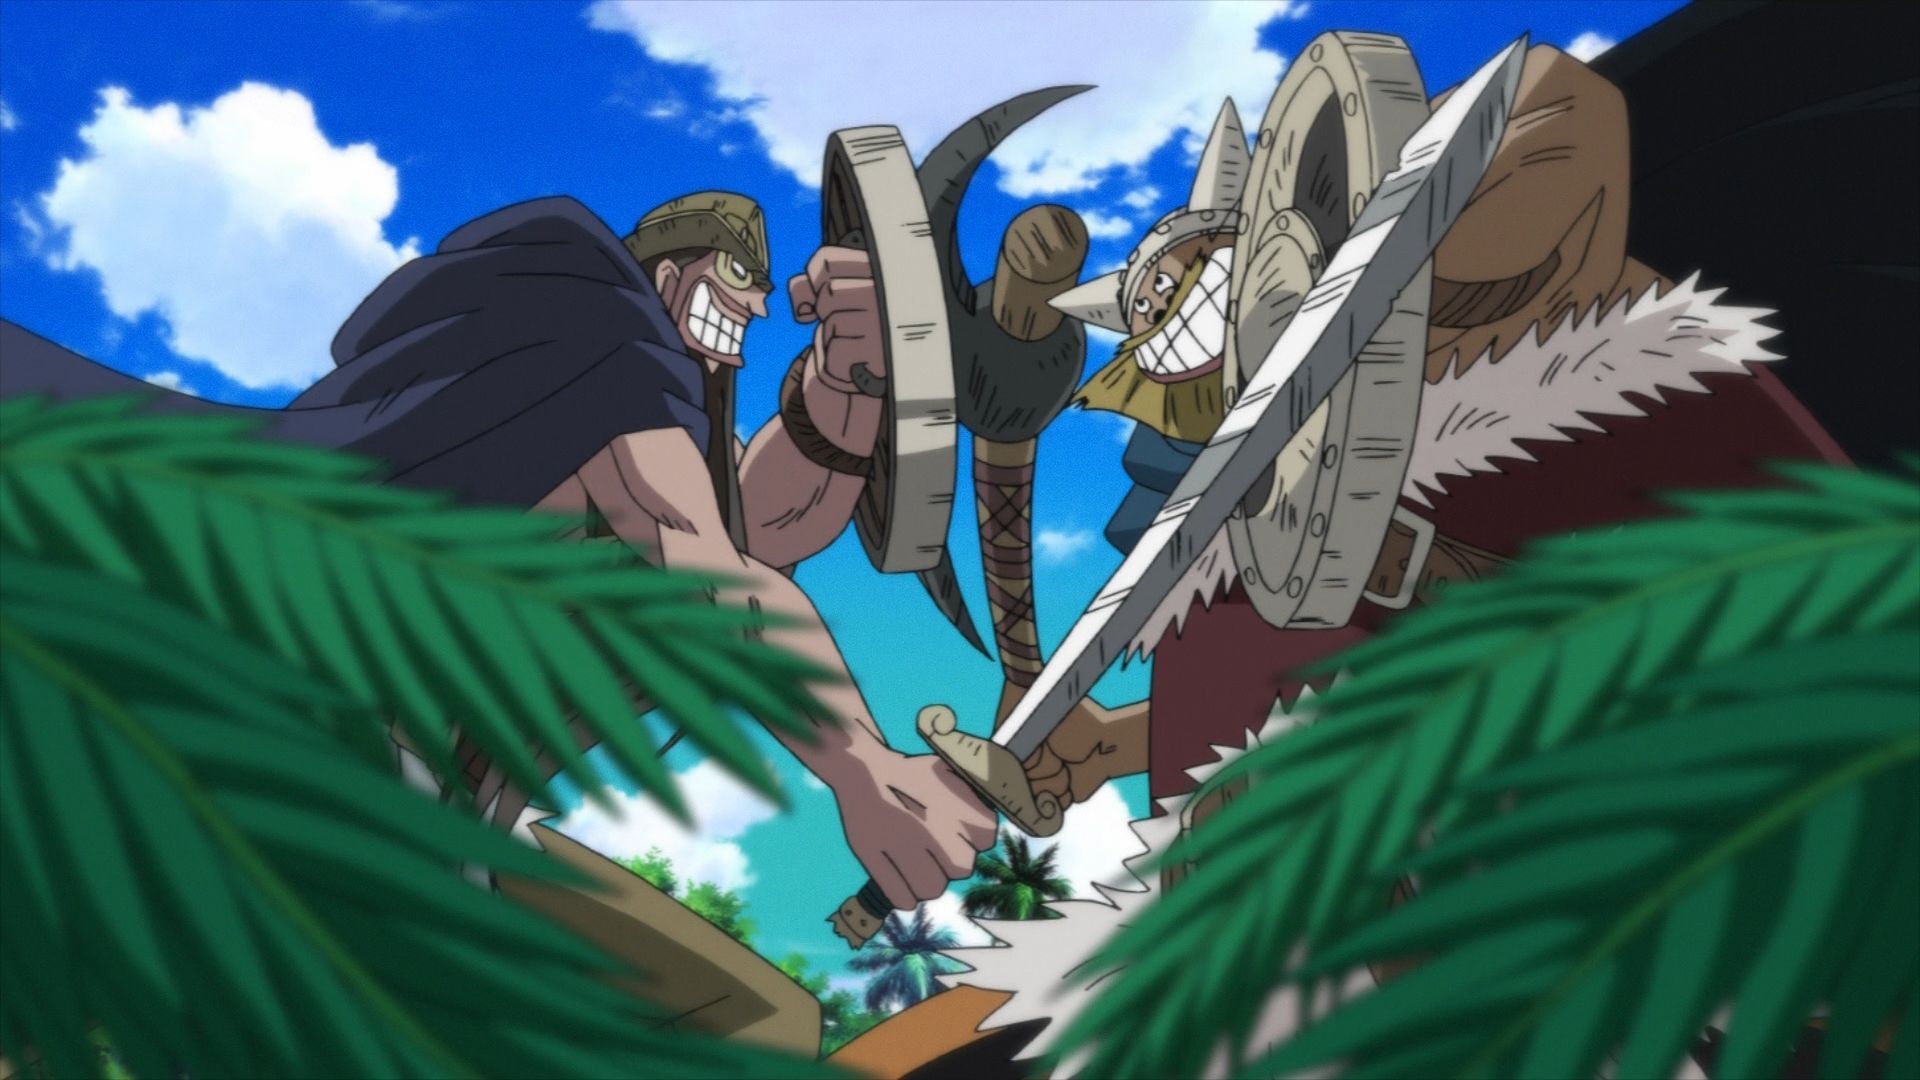 Dorry and Brogy fight by Luffy&#039;s side in One Piece chapter 1111 (Image via Toei Animation)